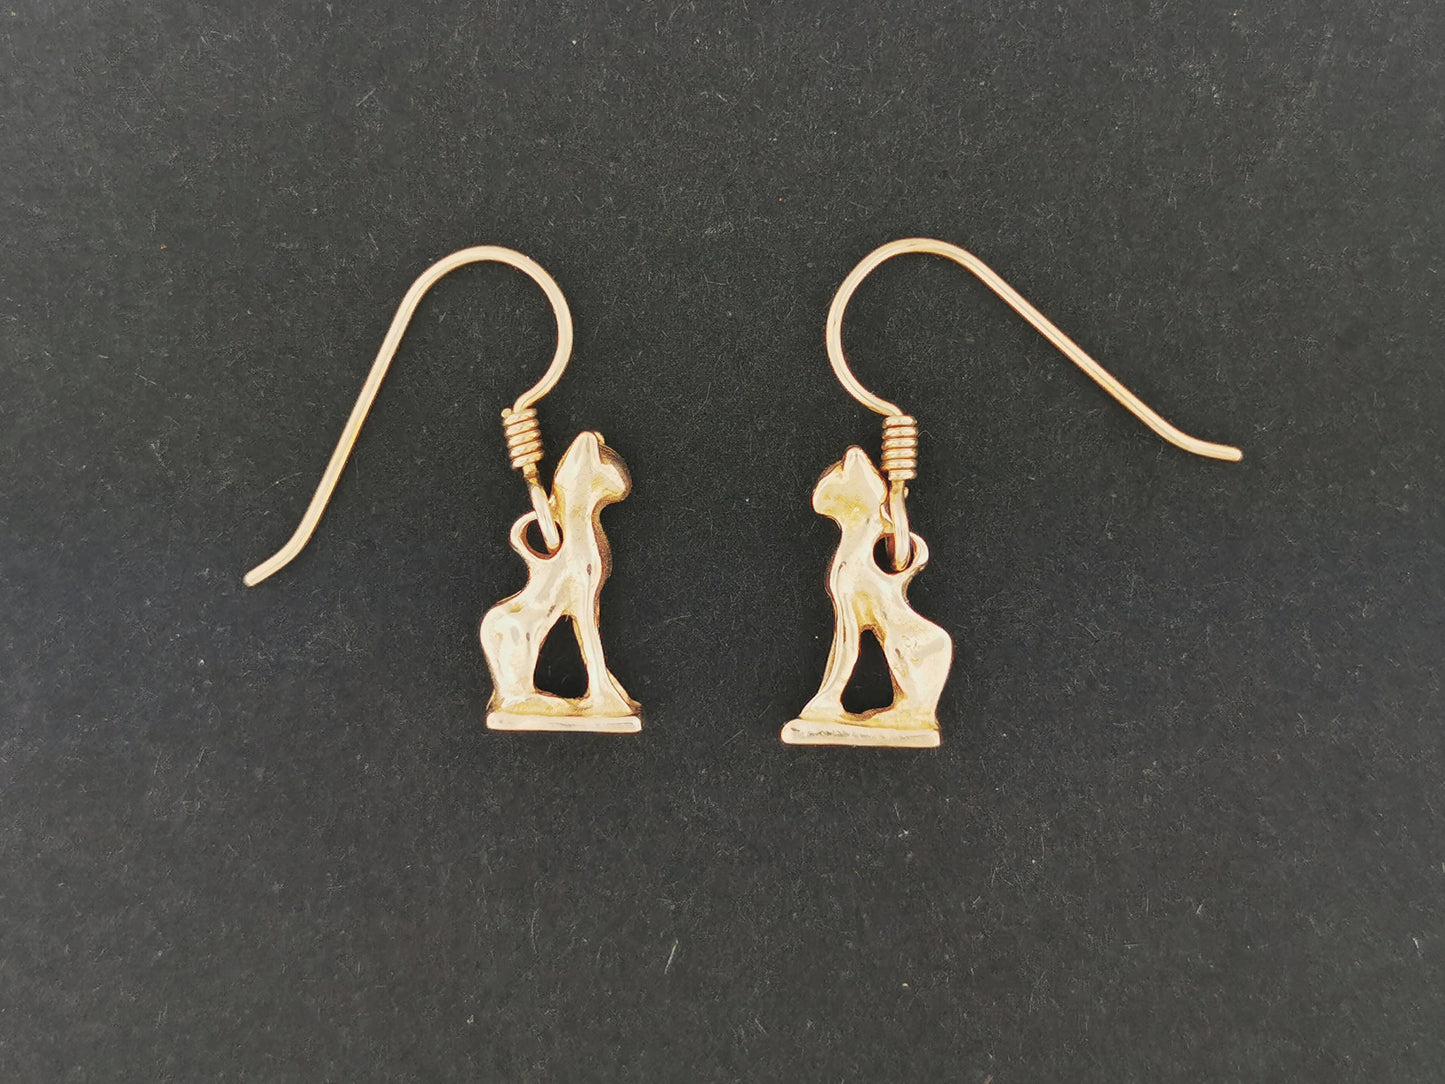 Bastet Cat Charm Earrings in Sterling Silver or Antique Bronze